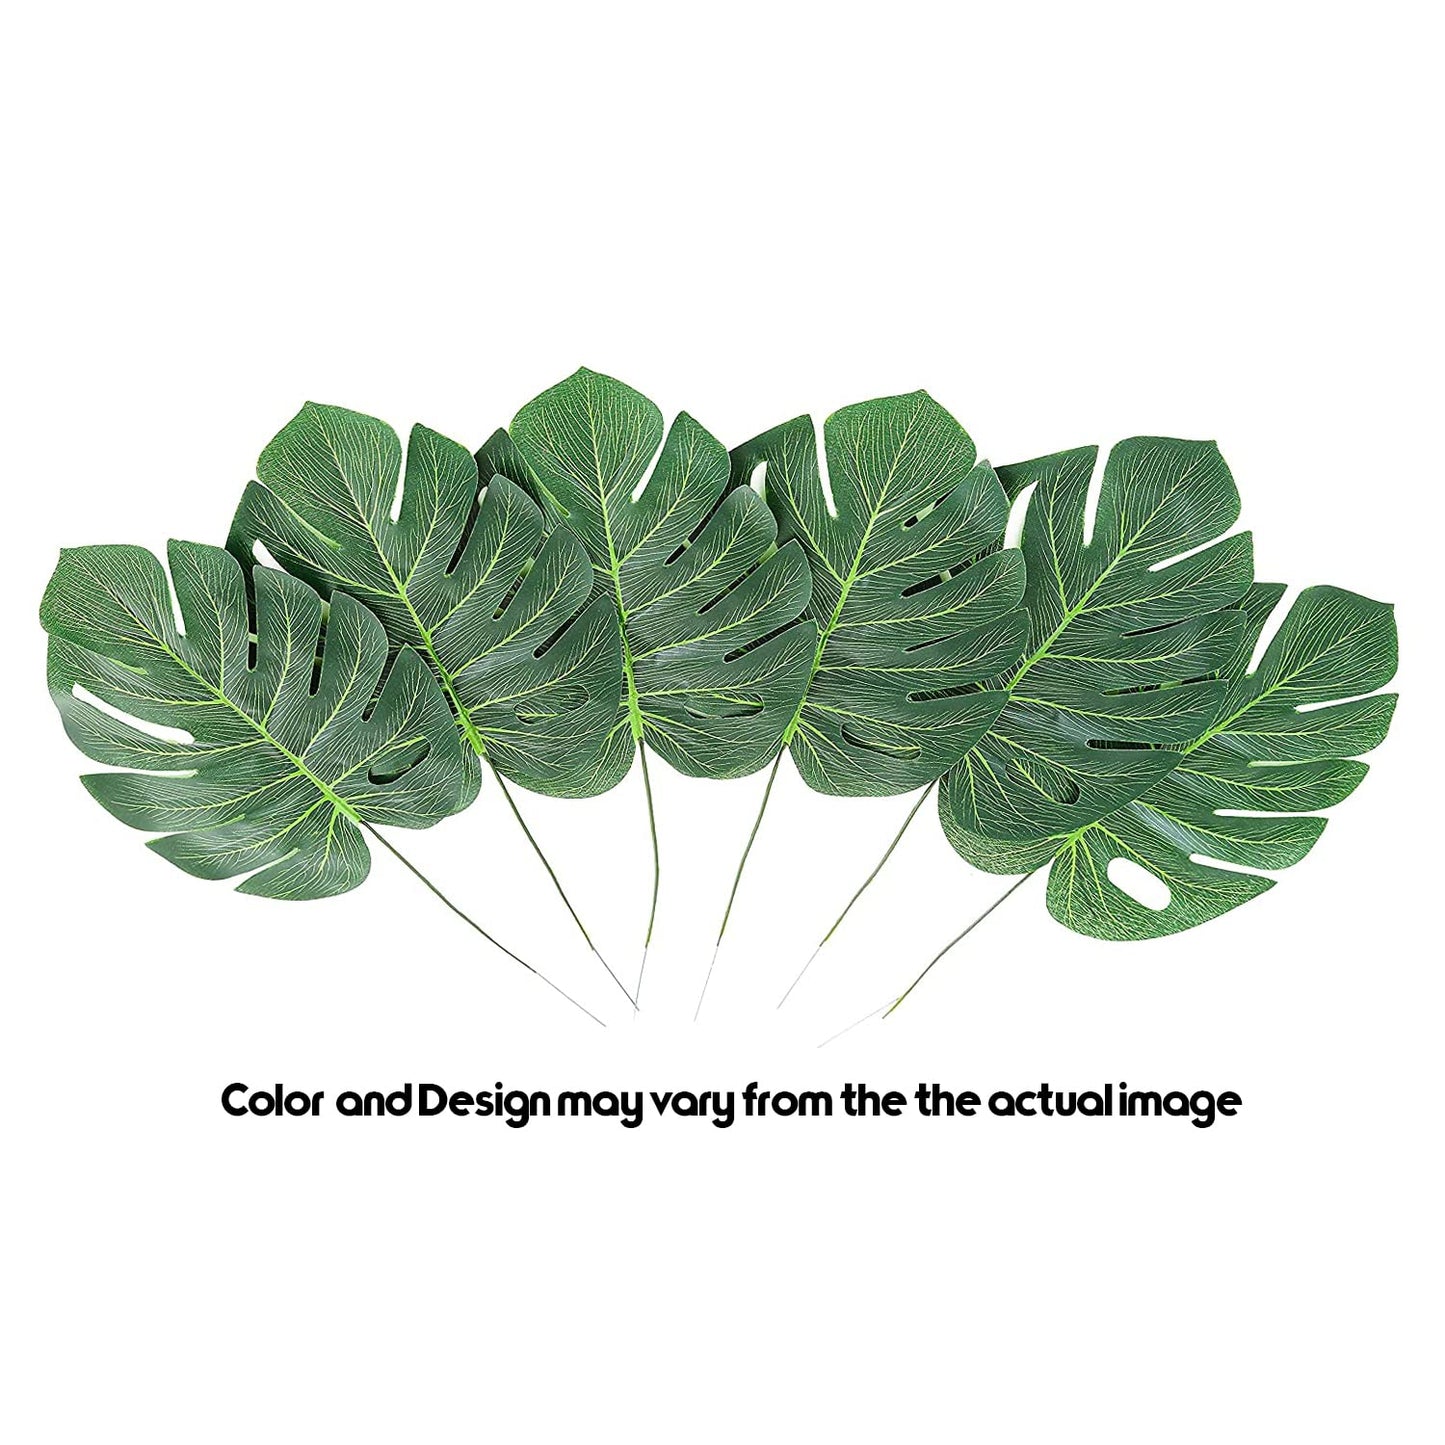 Jungle Theme Party Decoration Items for Kids Birthday - Pack of 55 Pcs - Bunting, Artificial Leaf, Latex Balloons, Arch tape - Decorating Items Birthday Party for Boy or Girl freeshipping - CherishX Partystore